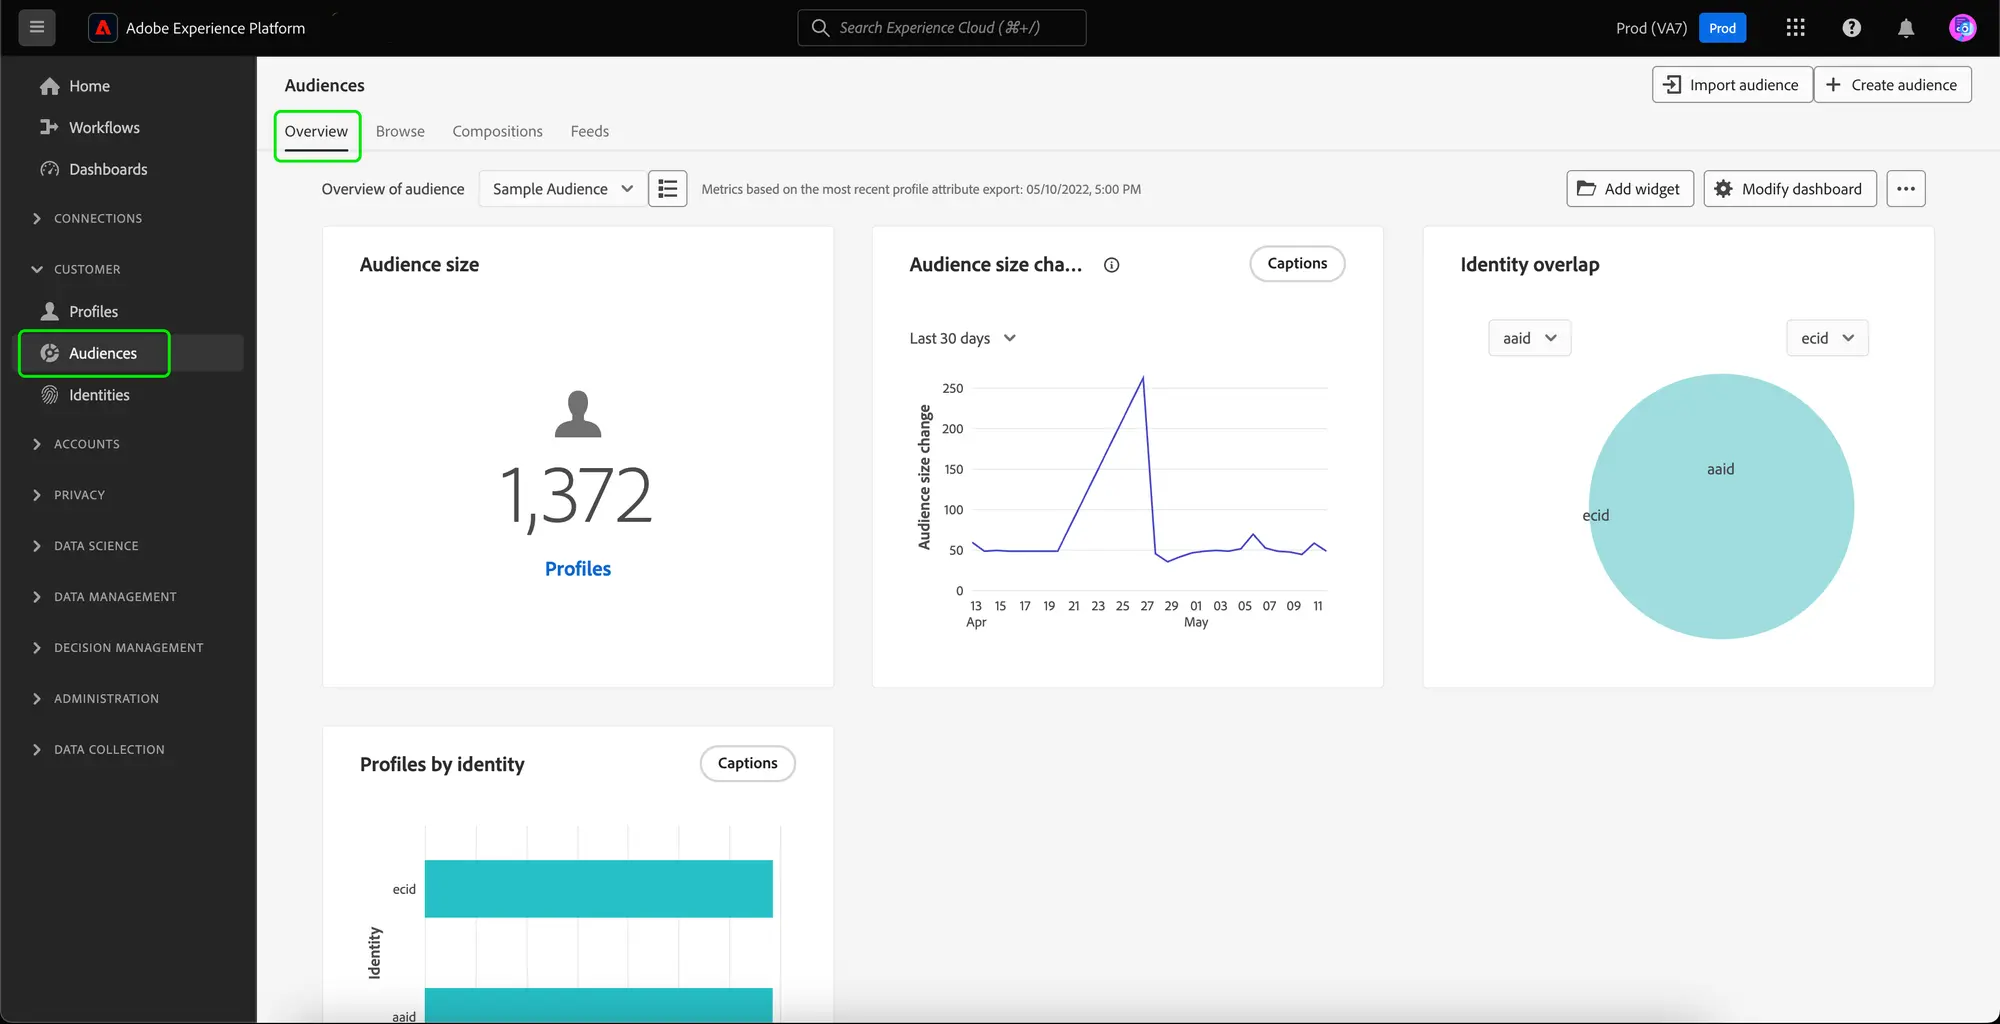 The audience dashboard is displayed. It shows various widgets, including the audience size, profiles by identity, identity overlap, and the audience size change trend.